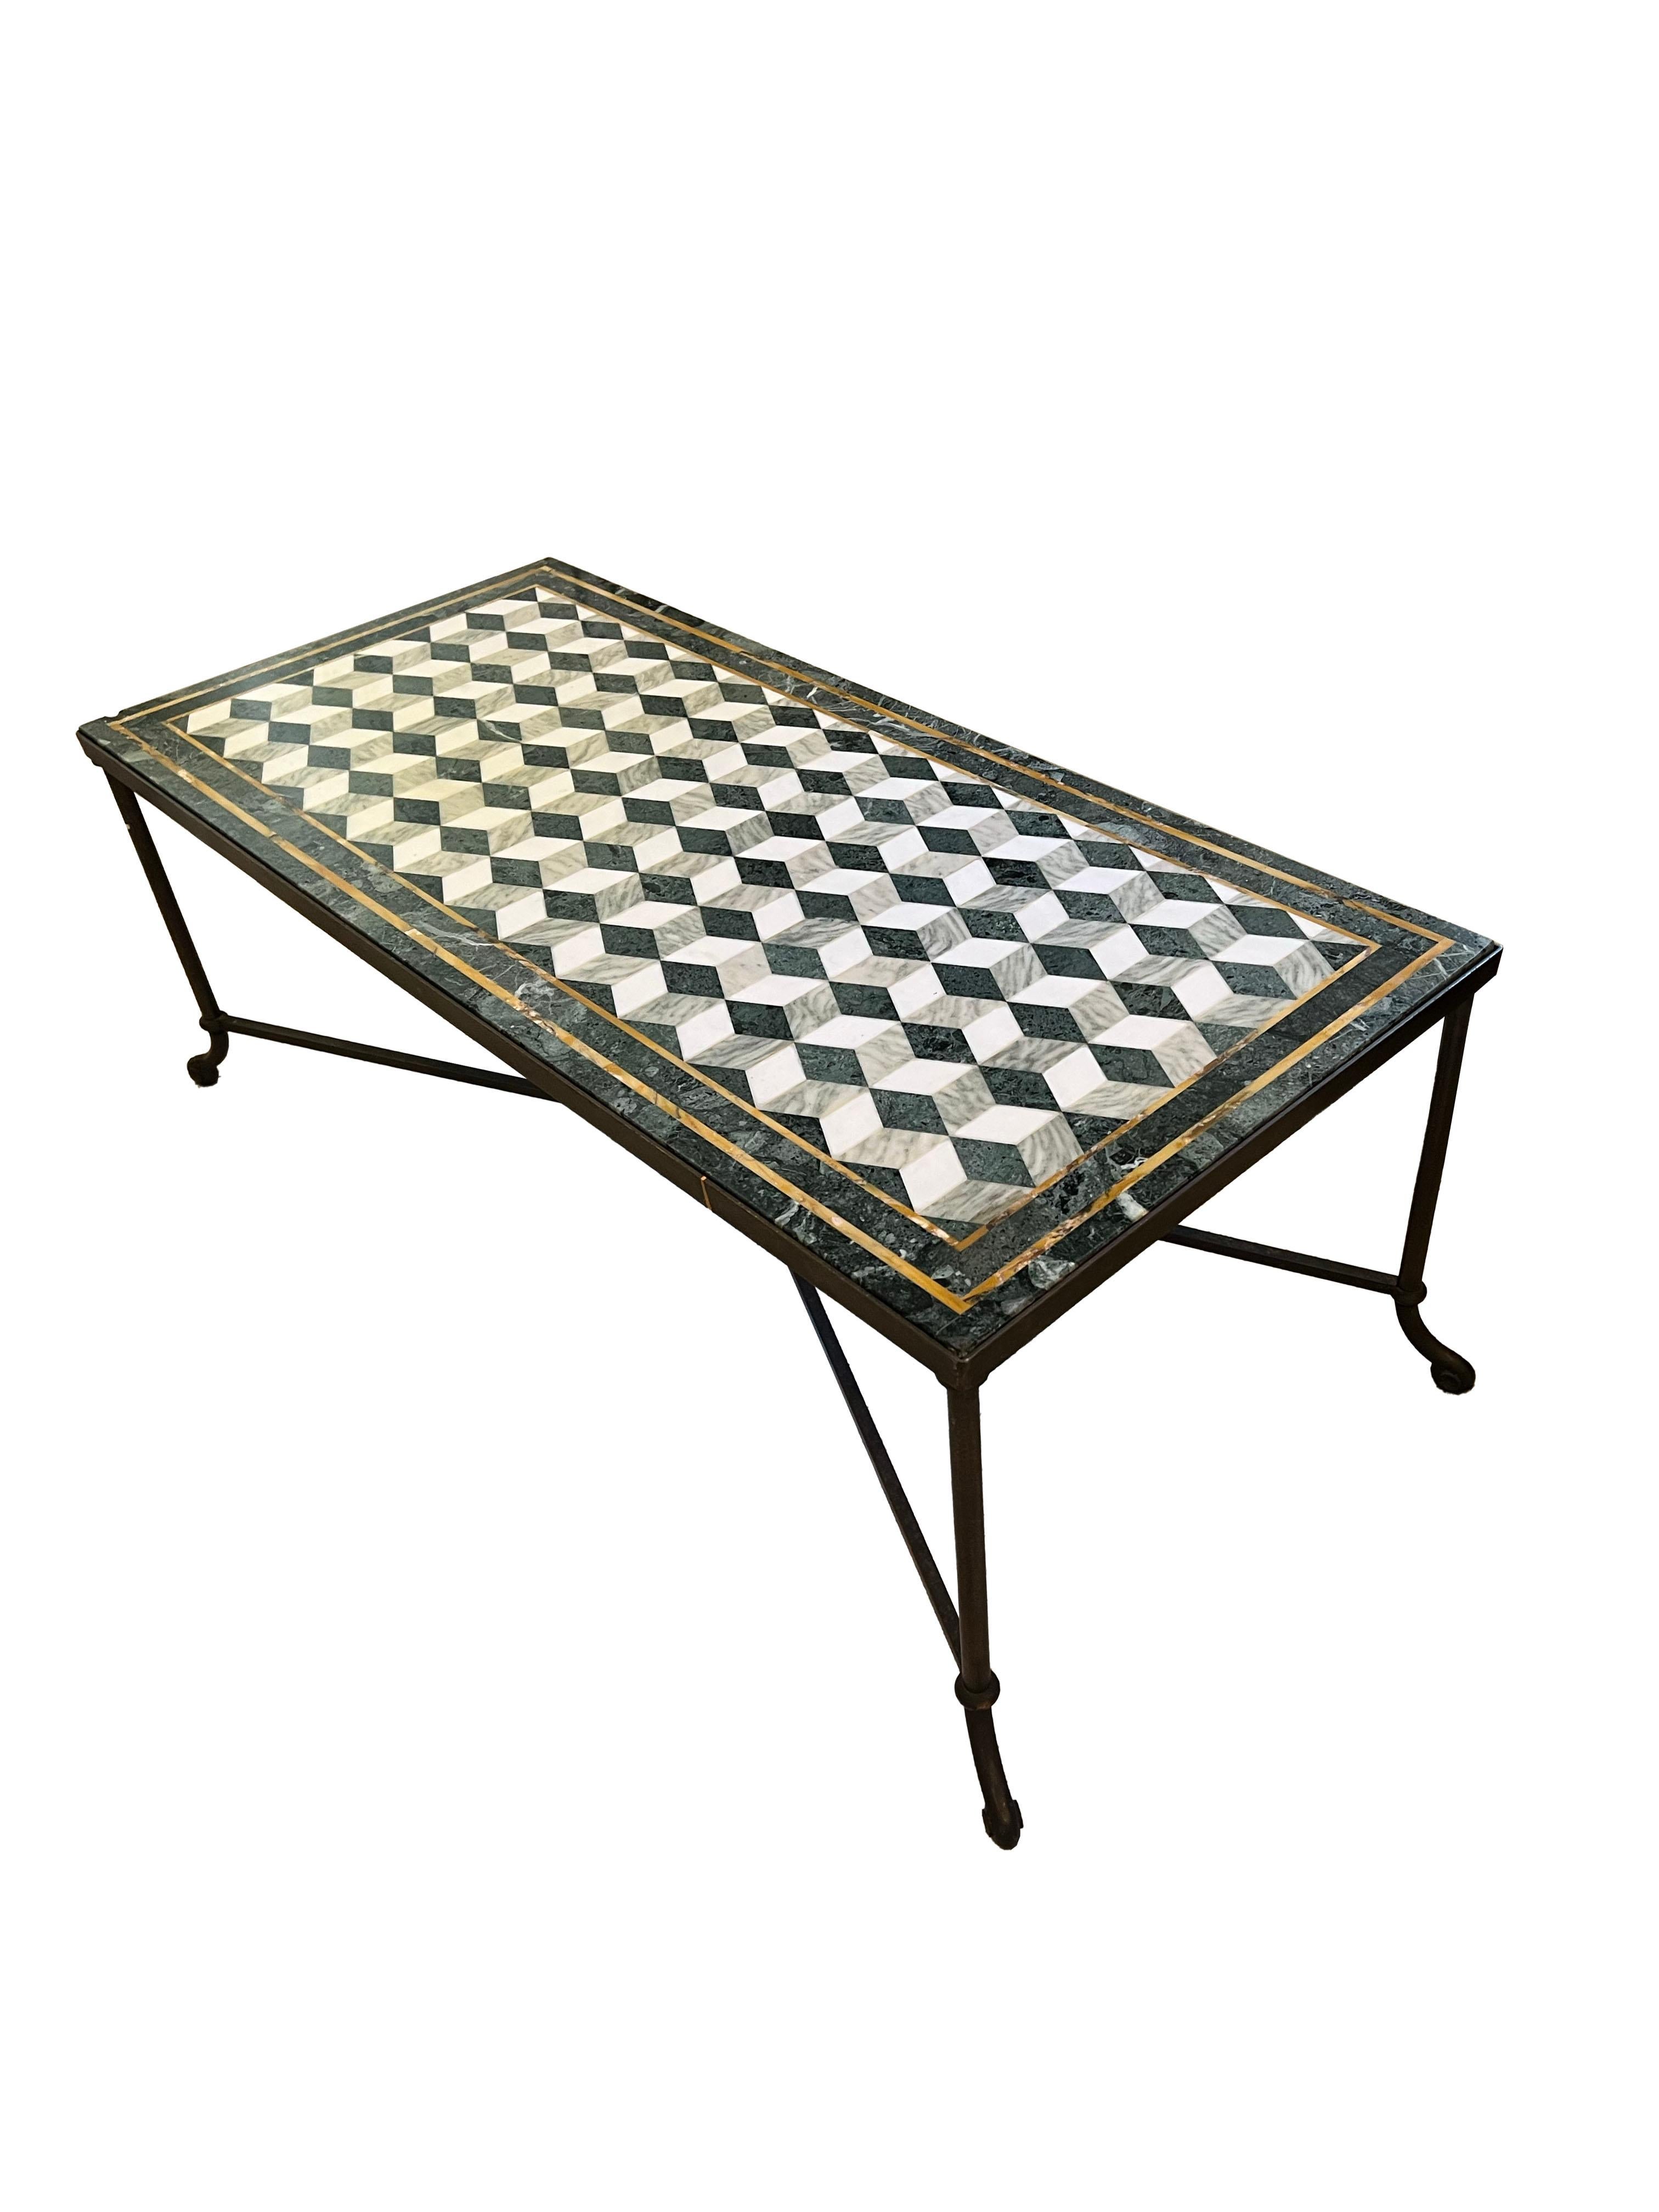 A stunning cocktail table, a statement piece destined to become the centerpiece of any room. Its surface is adorned with an exquisite geometric patterned marble top, where the interplay of green, gray, white, and gold hues creates a mesmerizing